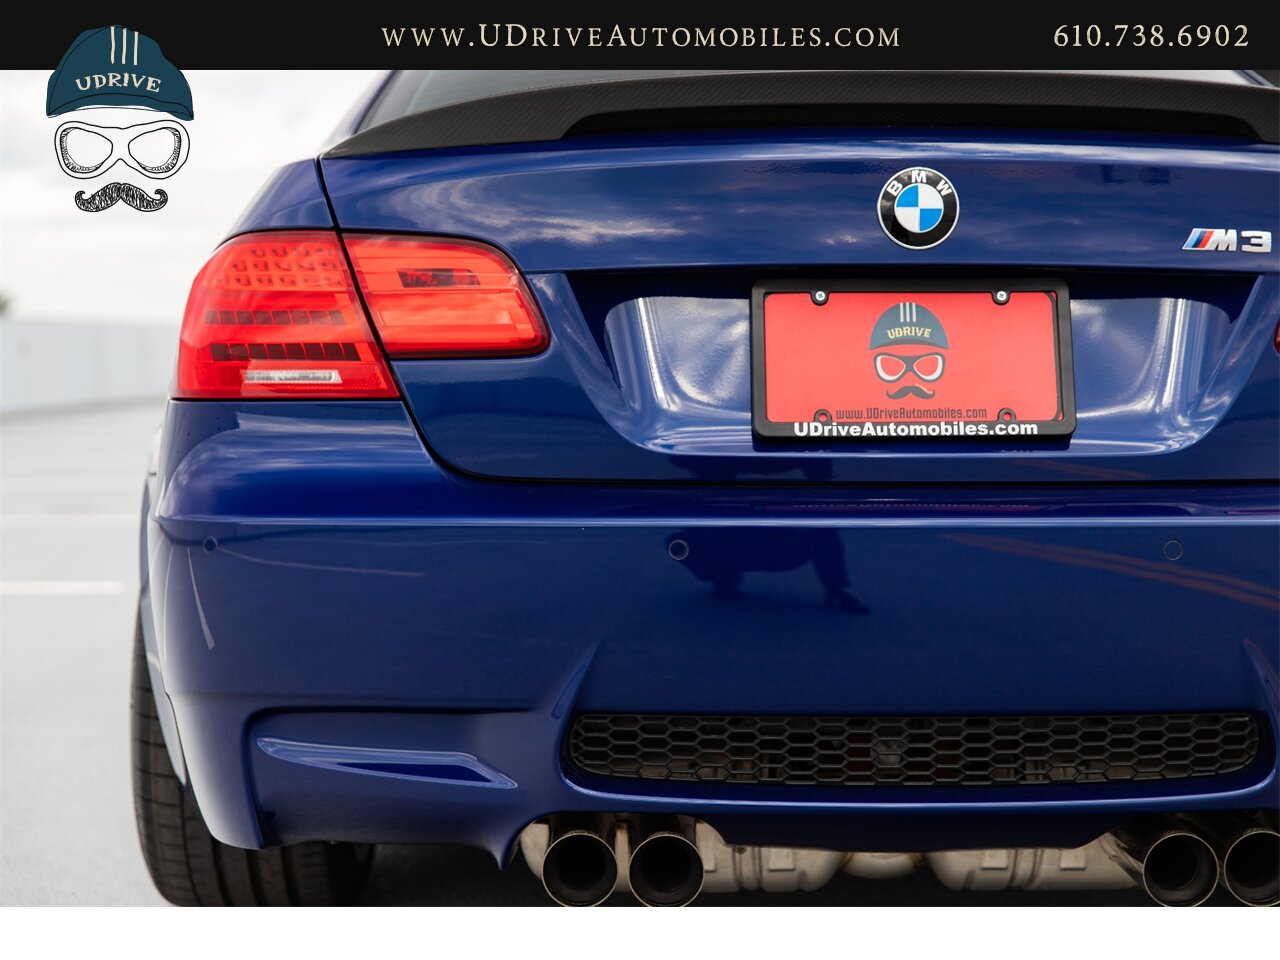 2011 BMW M3 E92 6 Speed Manual Competition Pkg Interlagos Blue  16k Miles Nav PDC EDC Comf Acc - Photo 22 - West Chester, PA 19382